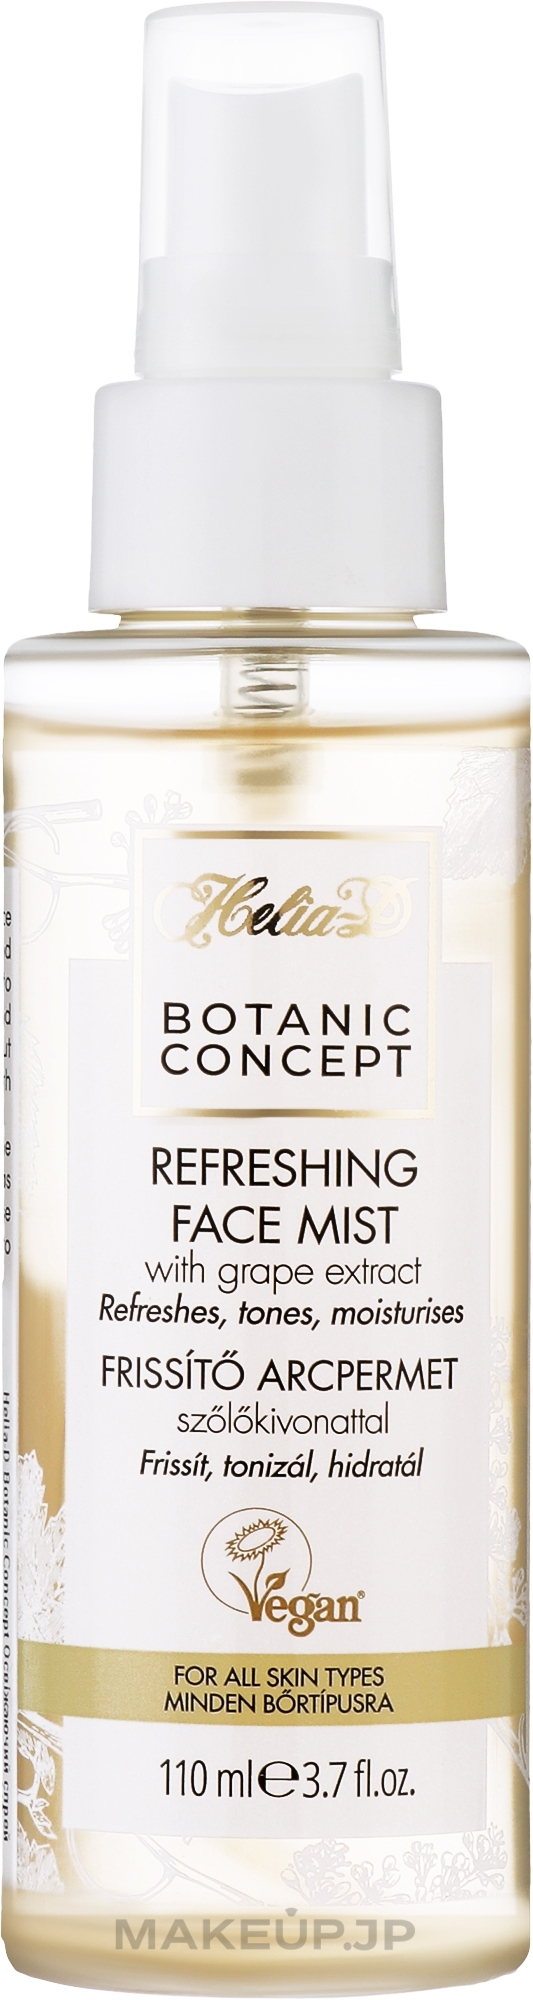 Refreshing Face Spray with Grape Water - Helia-D Botanic Concept Face Mist — photo 110 ml